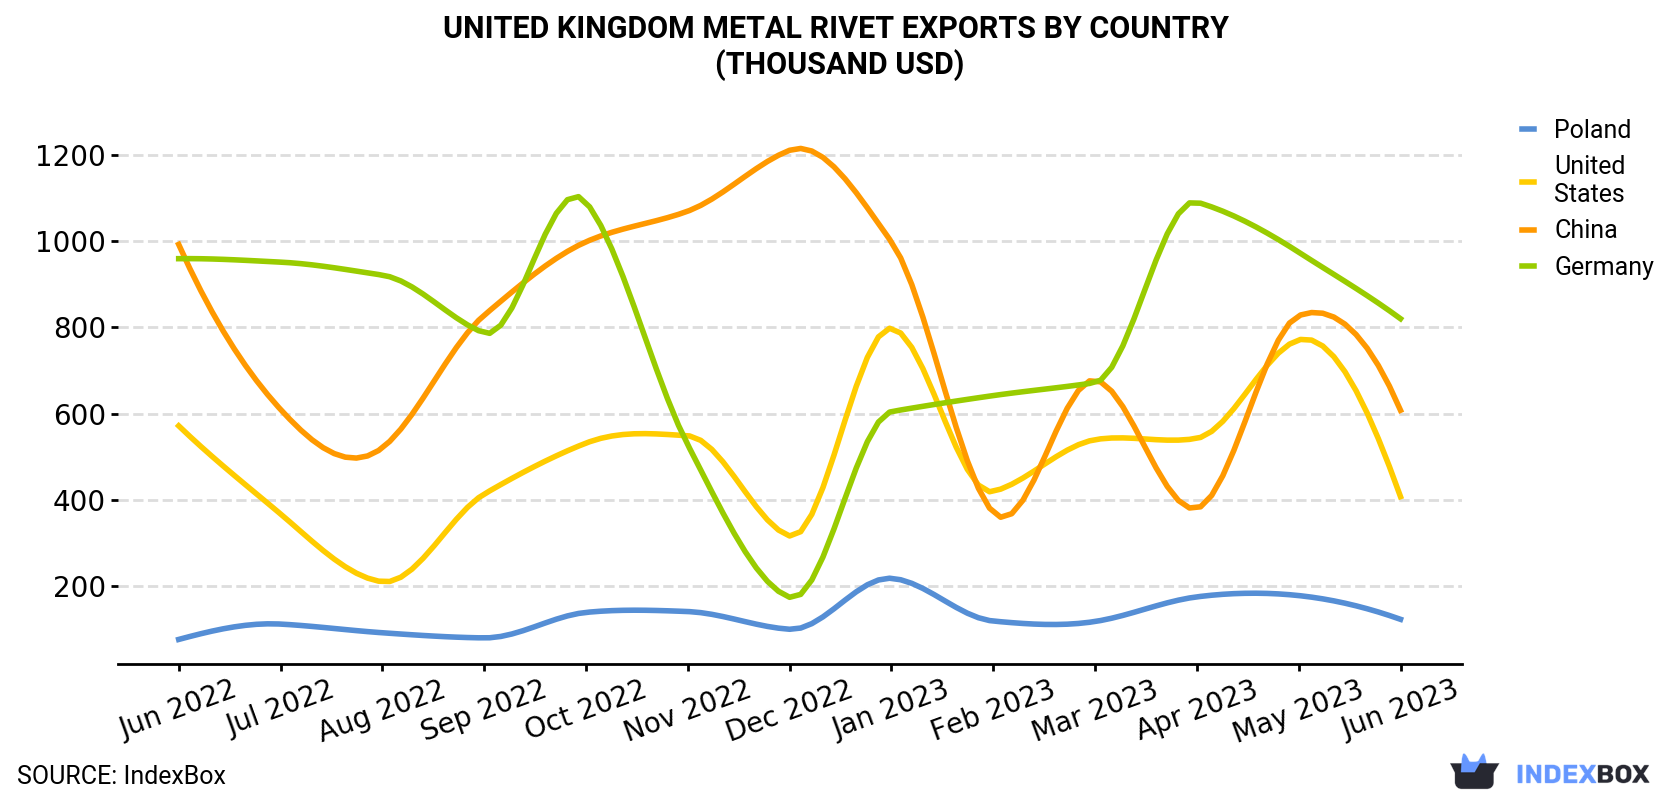 United Kingdom Metal Rivet Exports By Country (Thousand USD)